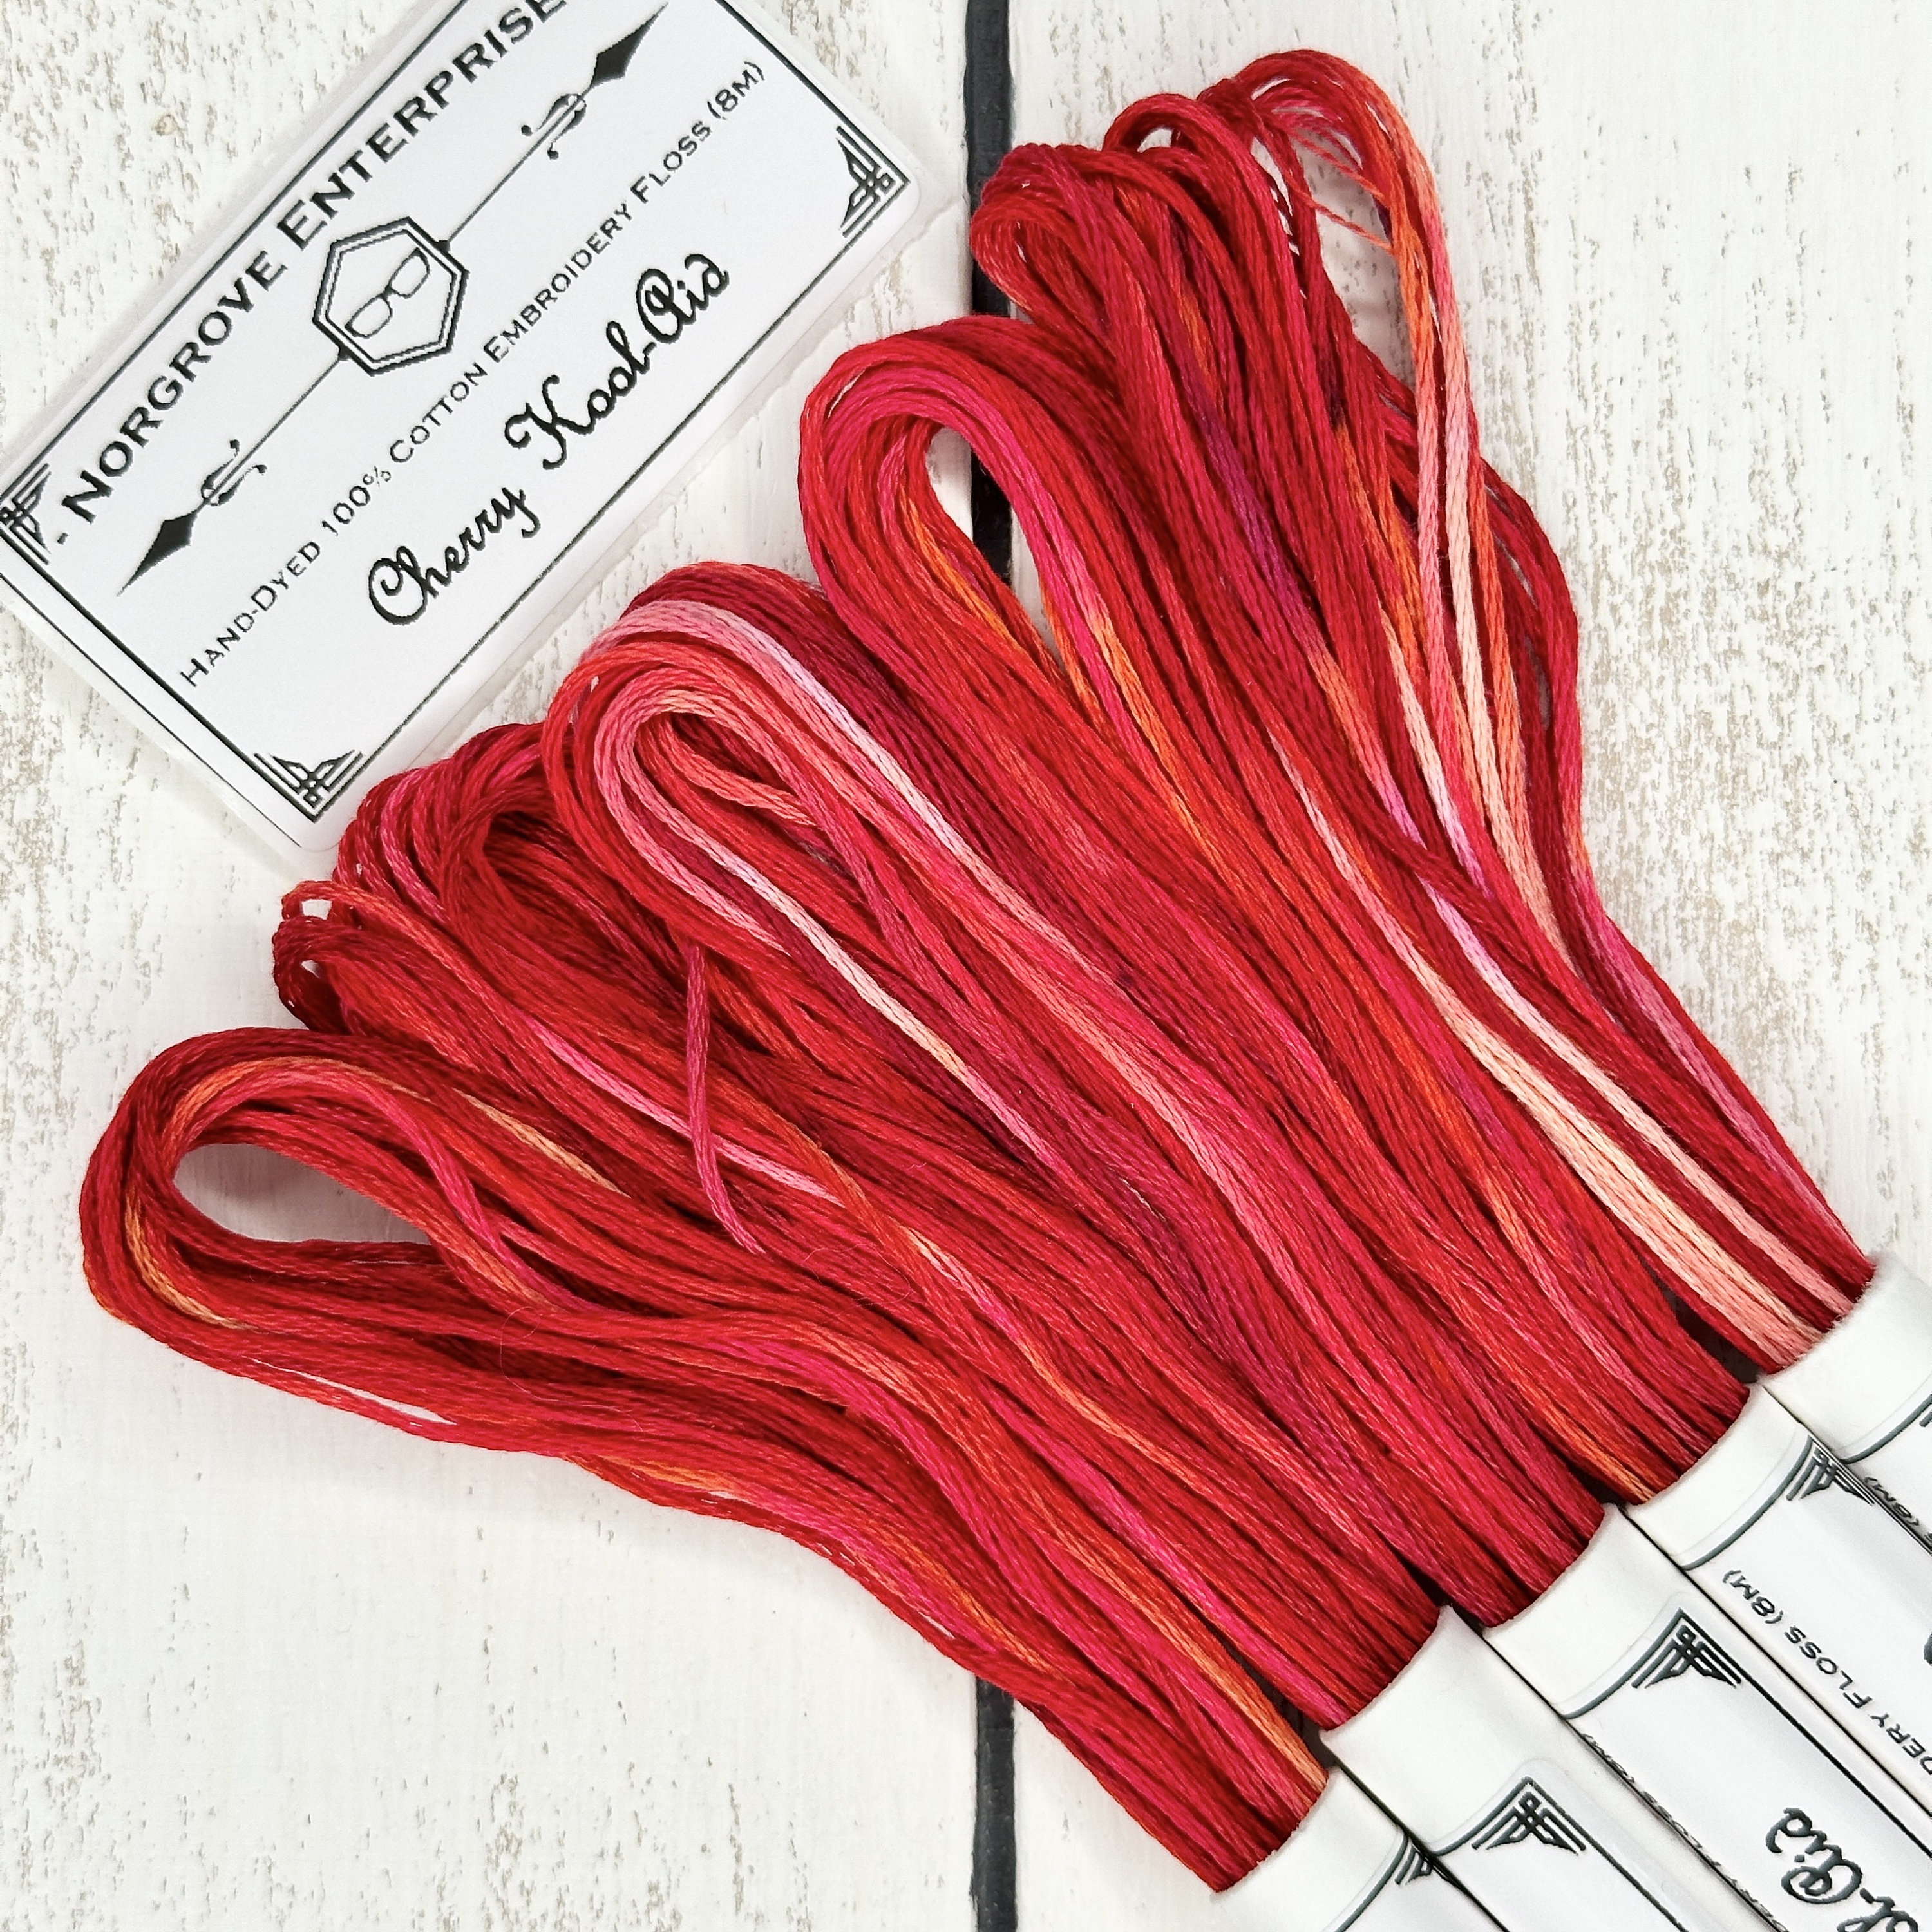 Metallic Embroidery Floss sullivans8.7yd select Colors Available